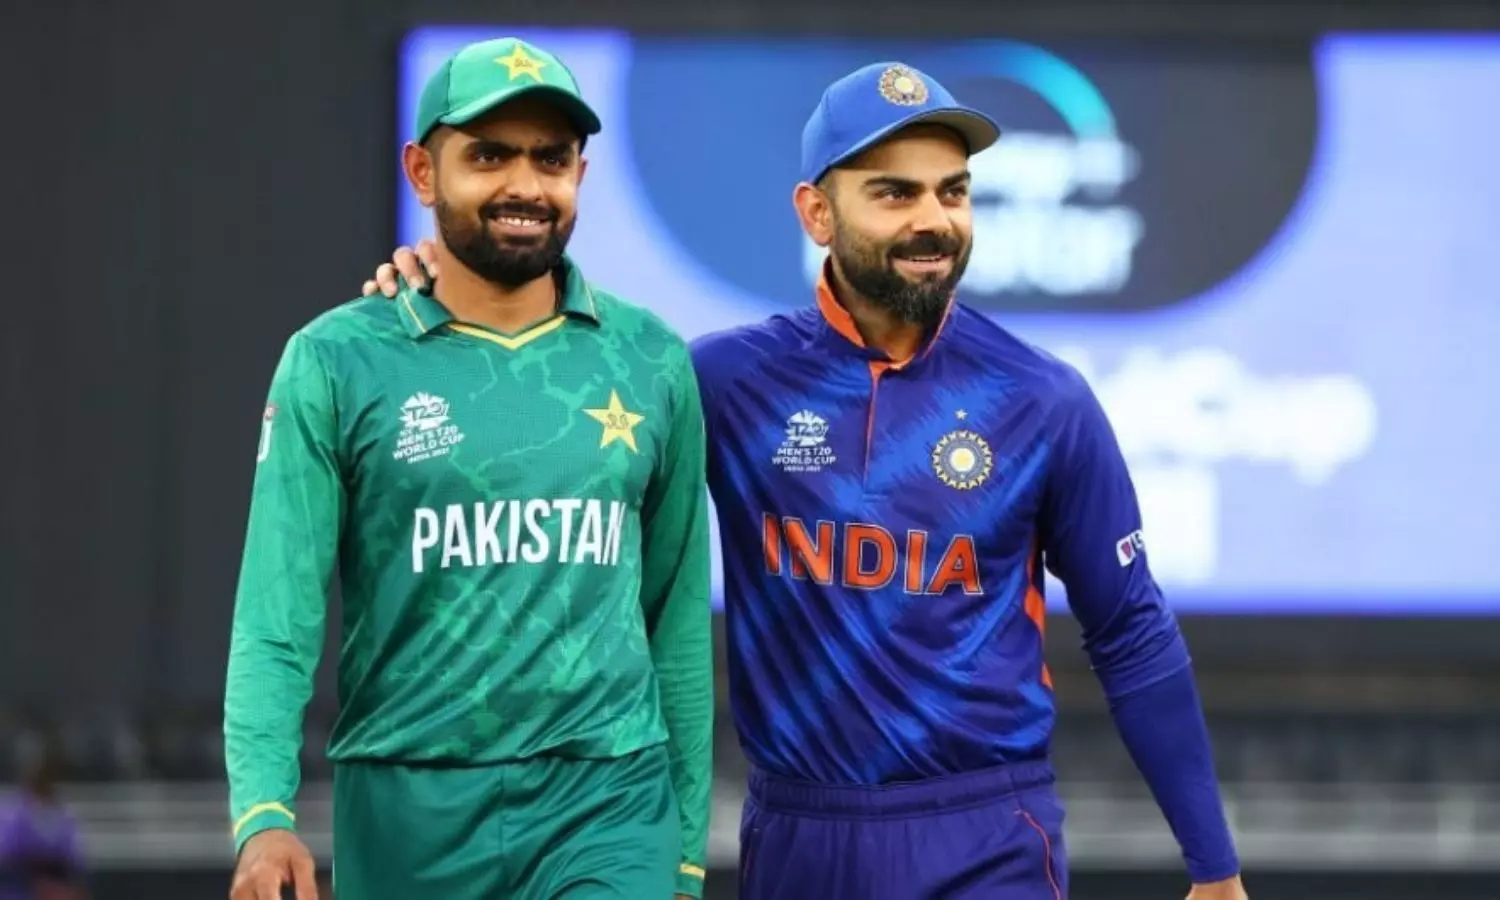 India-Pakistan 2021 World Cup clash becomes the most watched match in T20 history